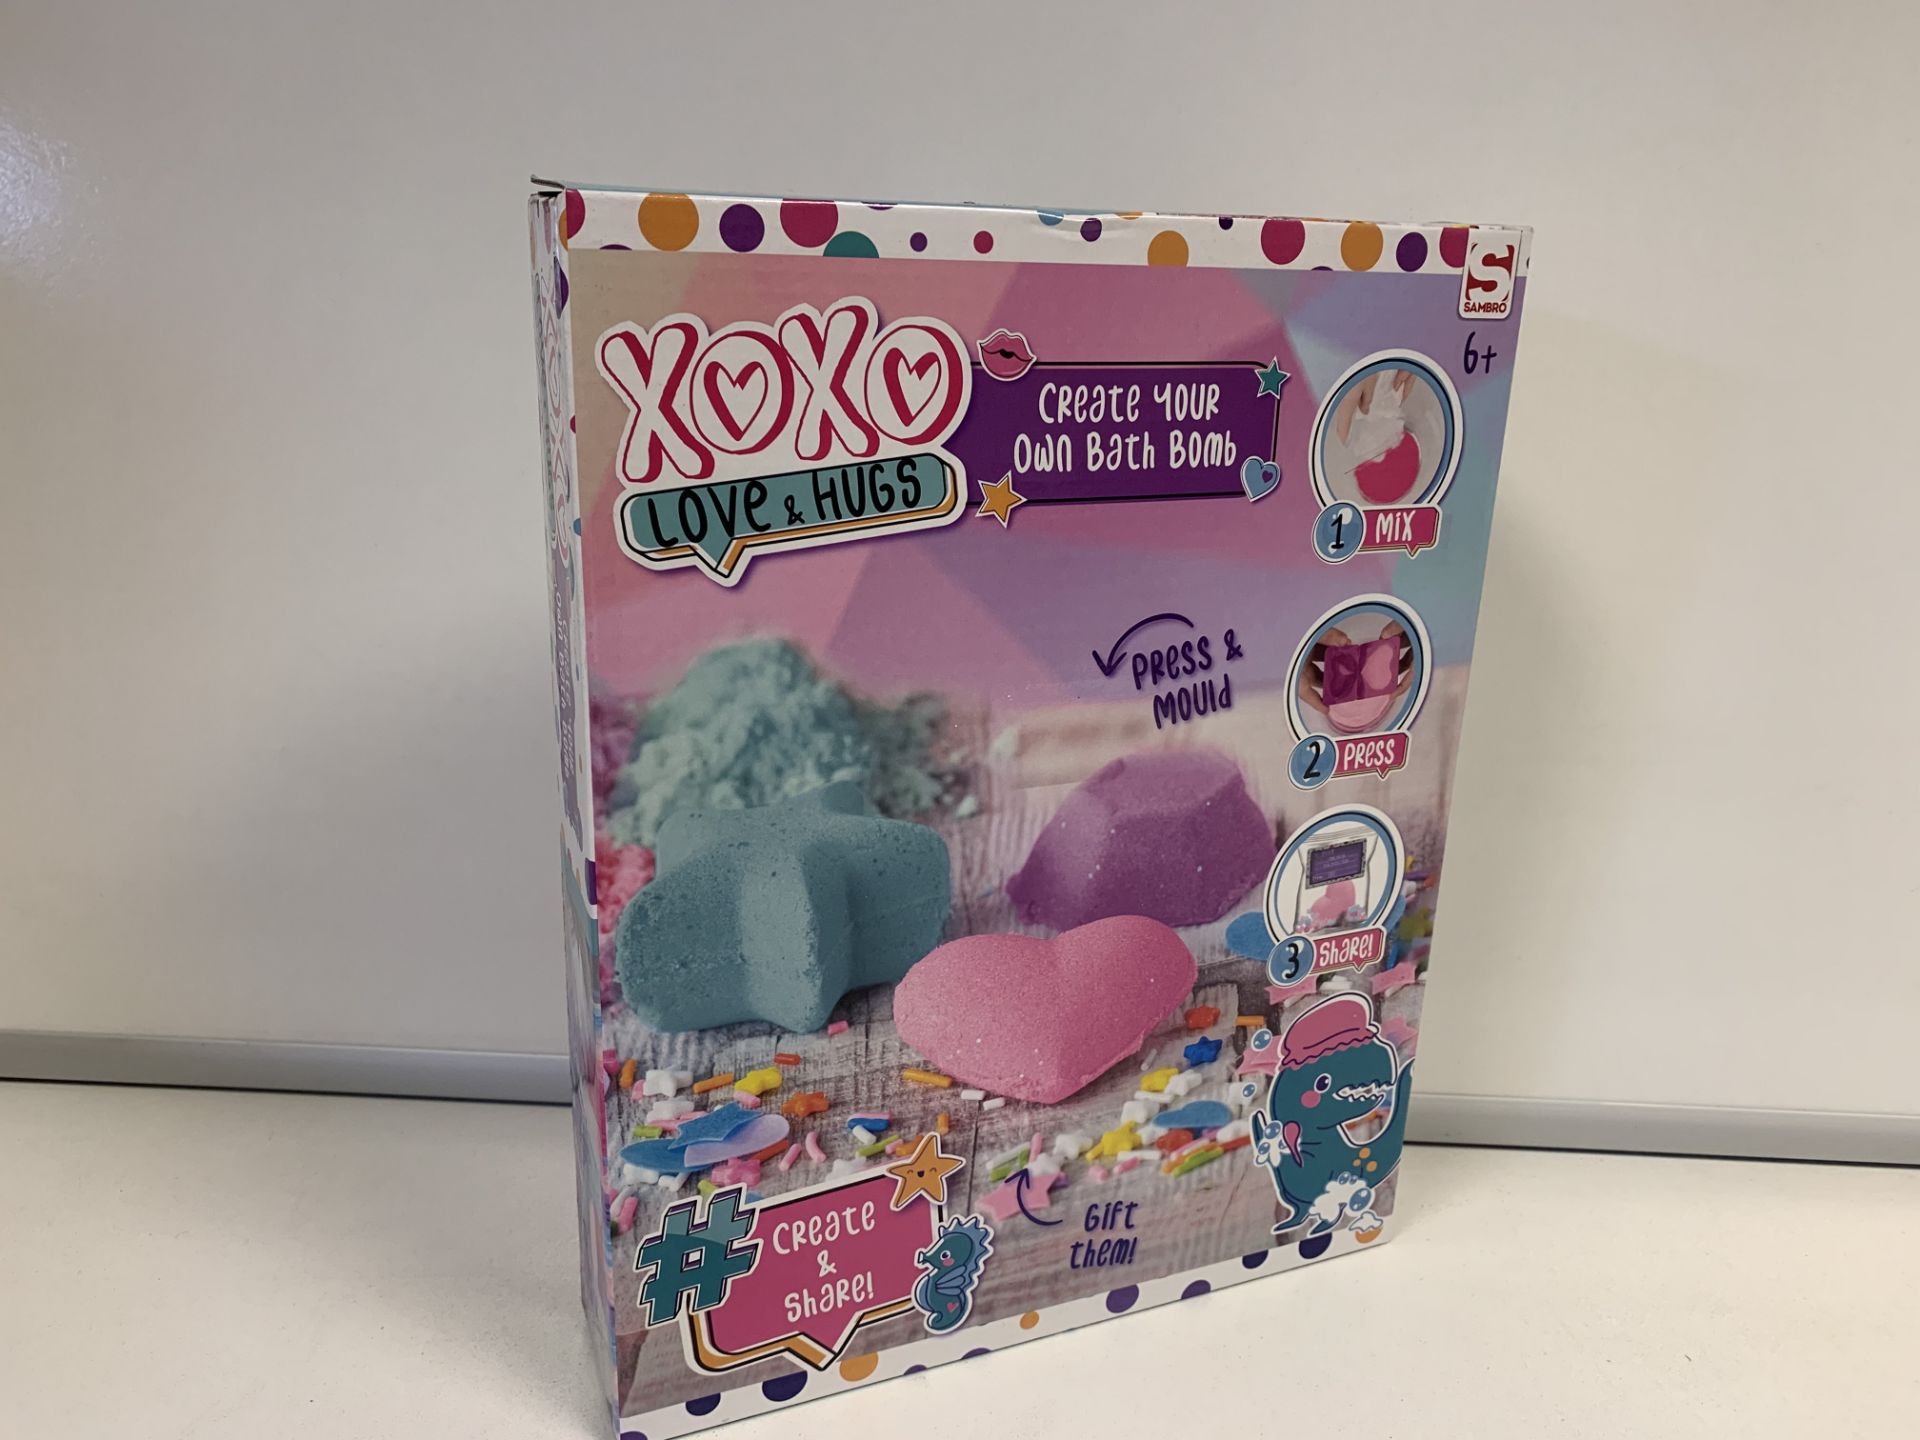 24 X BRAND NEW BOXED XOXO LOVE AND HUGS CREATE YOUR OWN BATH BOMB SETS IN 3 BOXES